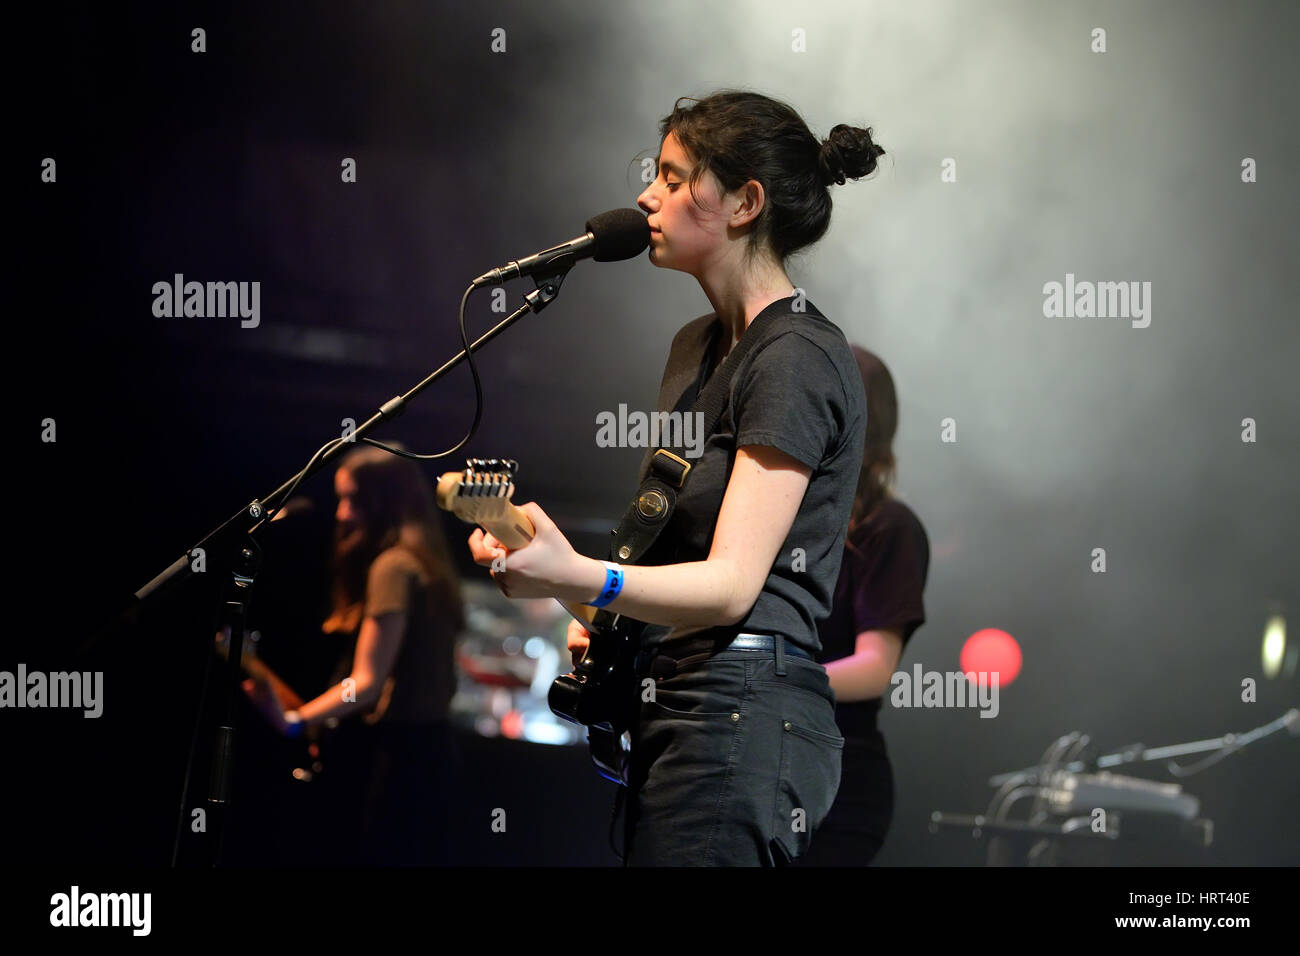 BARCELONA - FEB 8: Mourn (band) performs at Apolo venue on February 8, 2015 in Barcelona, Spain. Stock Photo